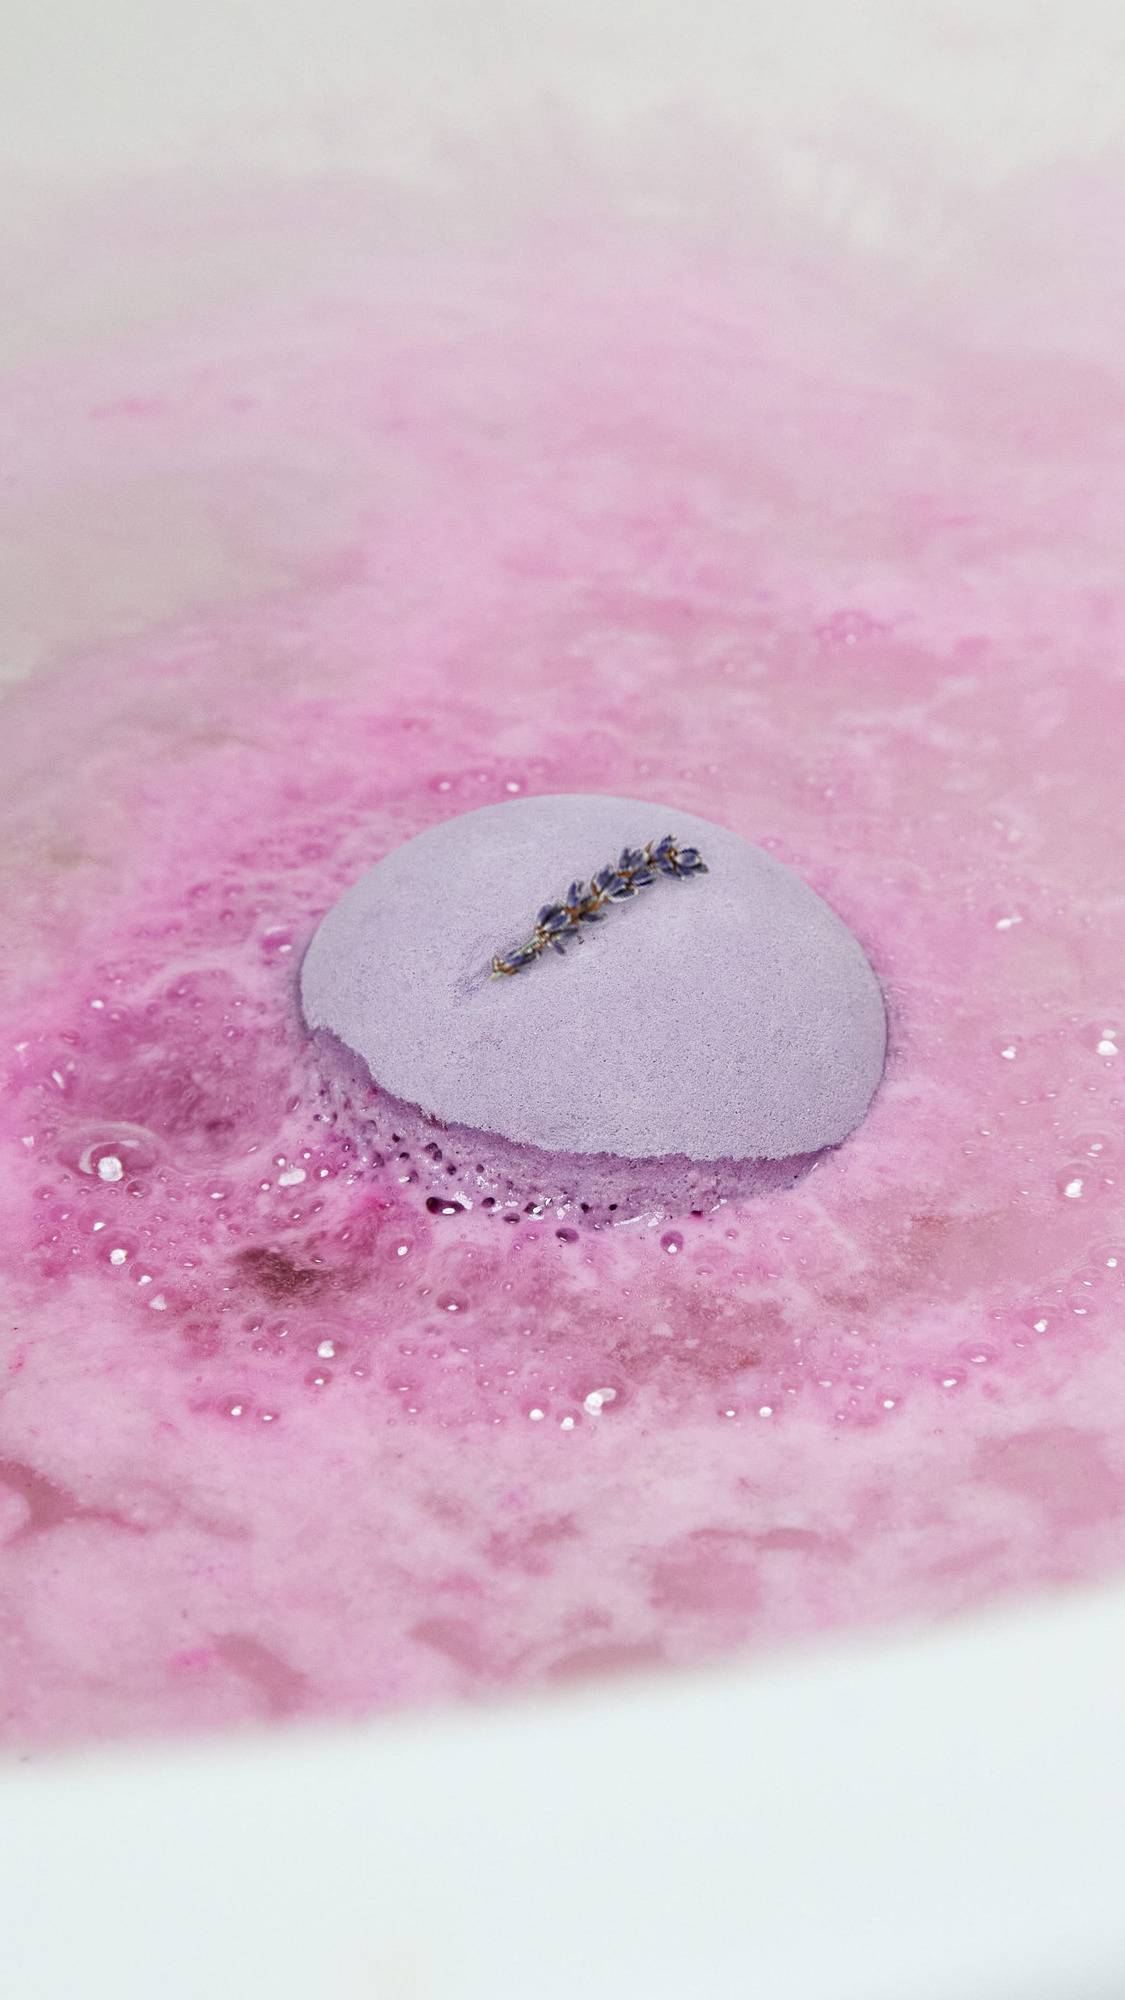 The One With Lavender bath bomb has been placed gently into the bath as it begins to push out a thick blanket of velvety, violet foam.